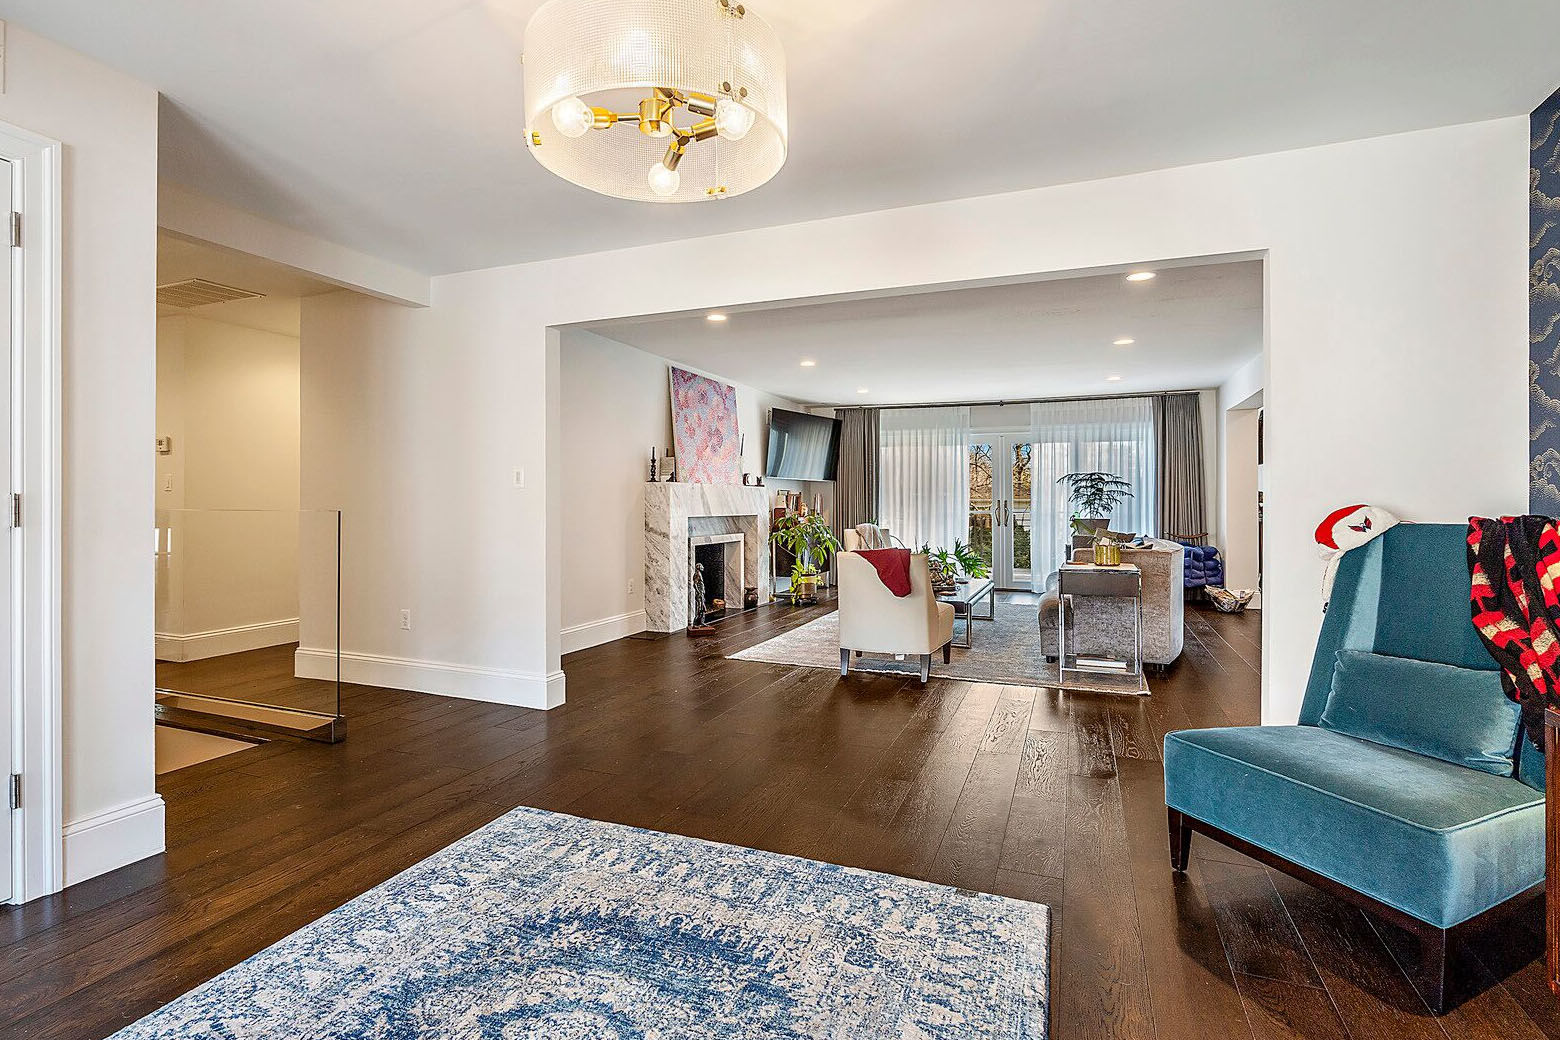 The house, which was listed for $1.75 million, features wall-to-wall walnut hardwood floors, valued at $80,000. (Courtesy Century 21 New Millennium/RealMarkets)